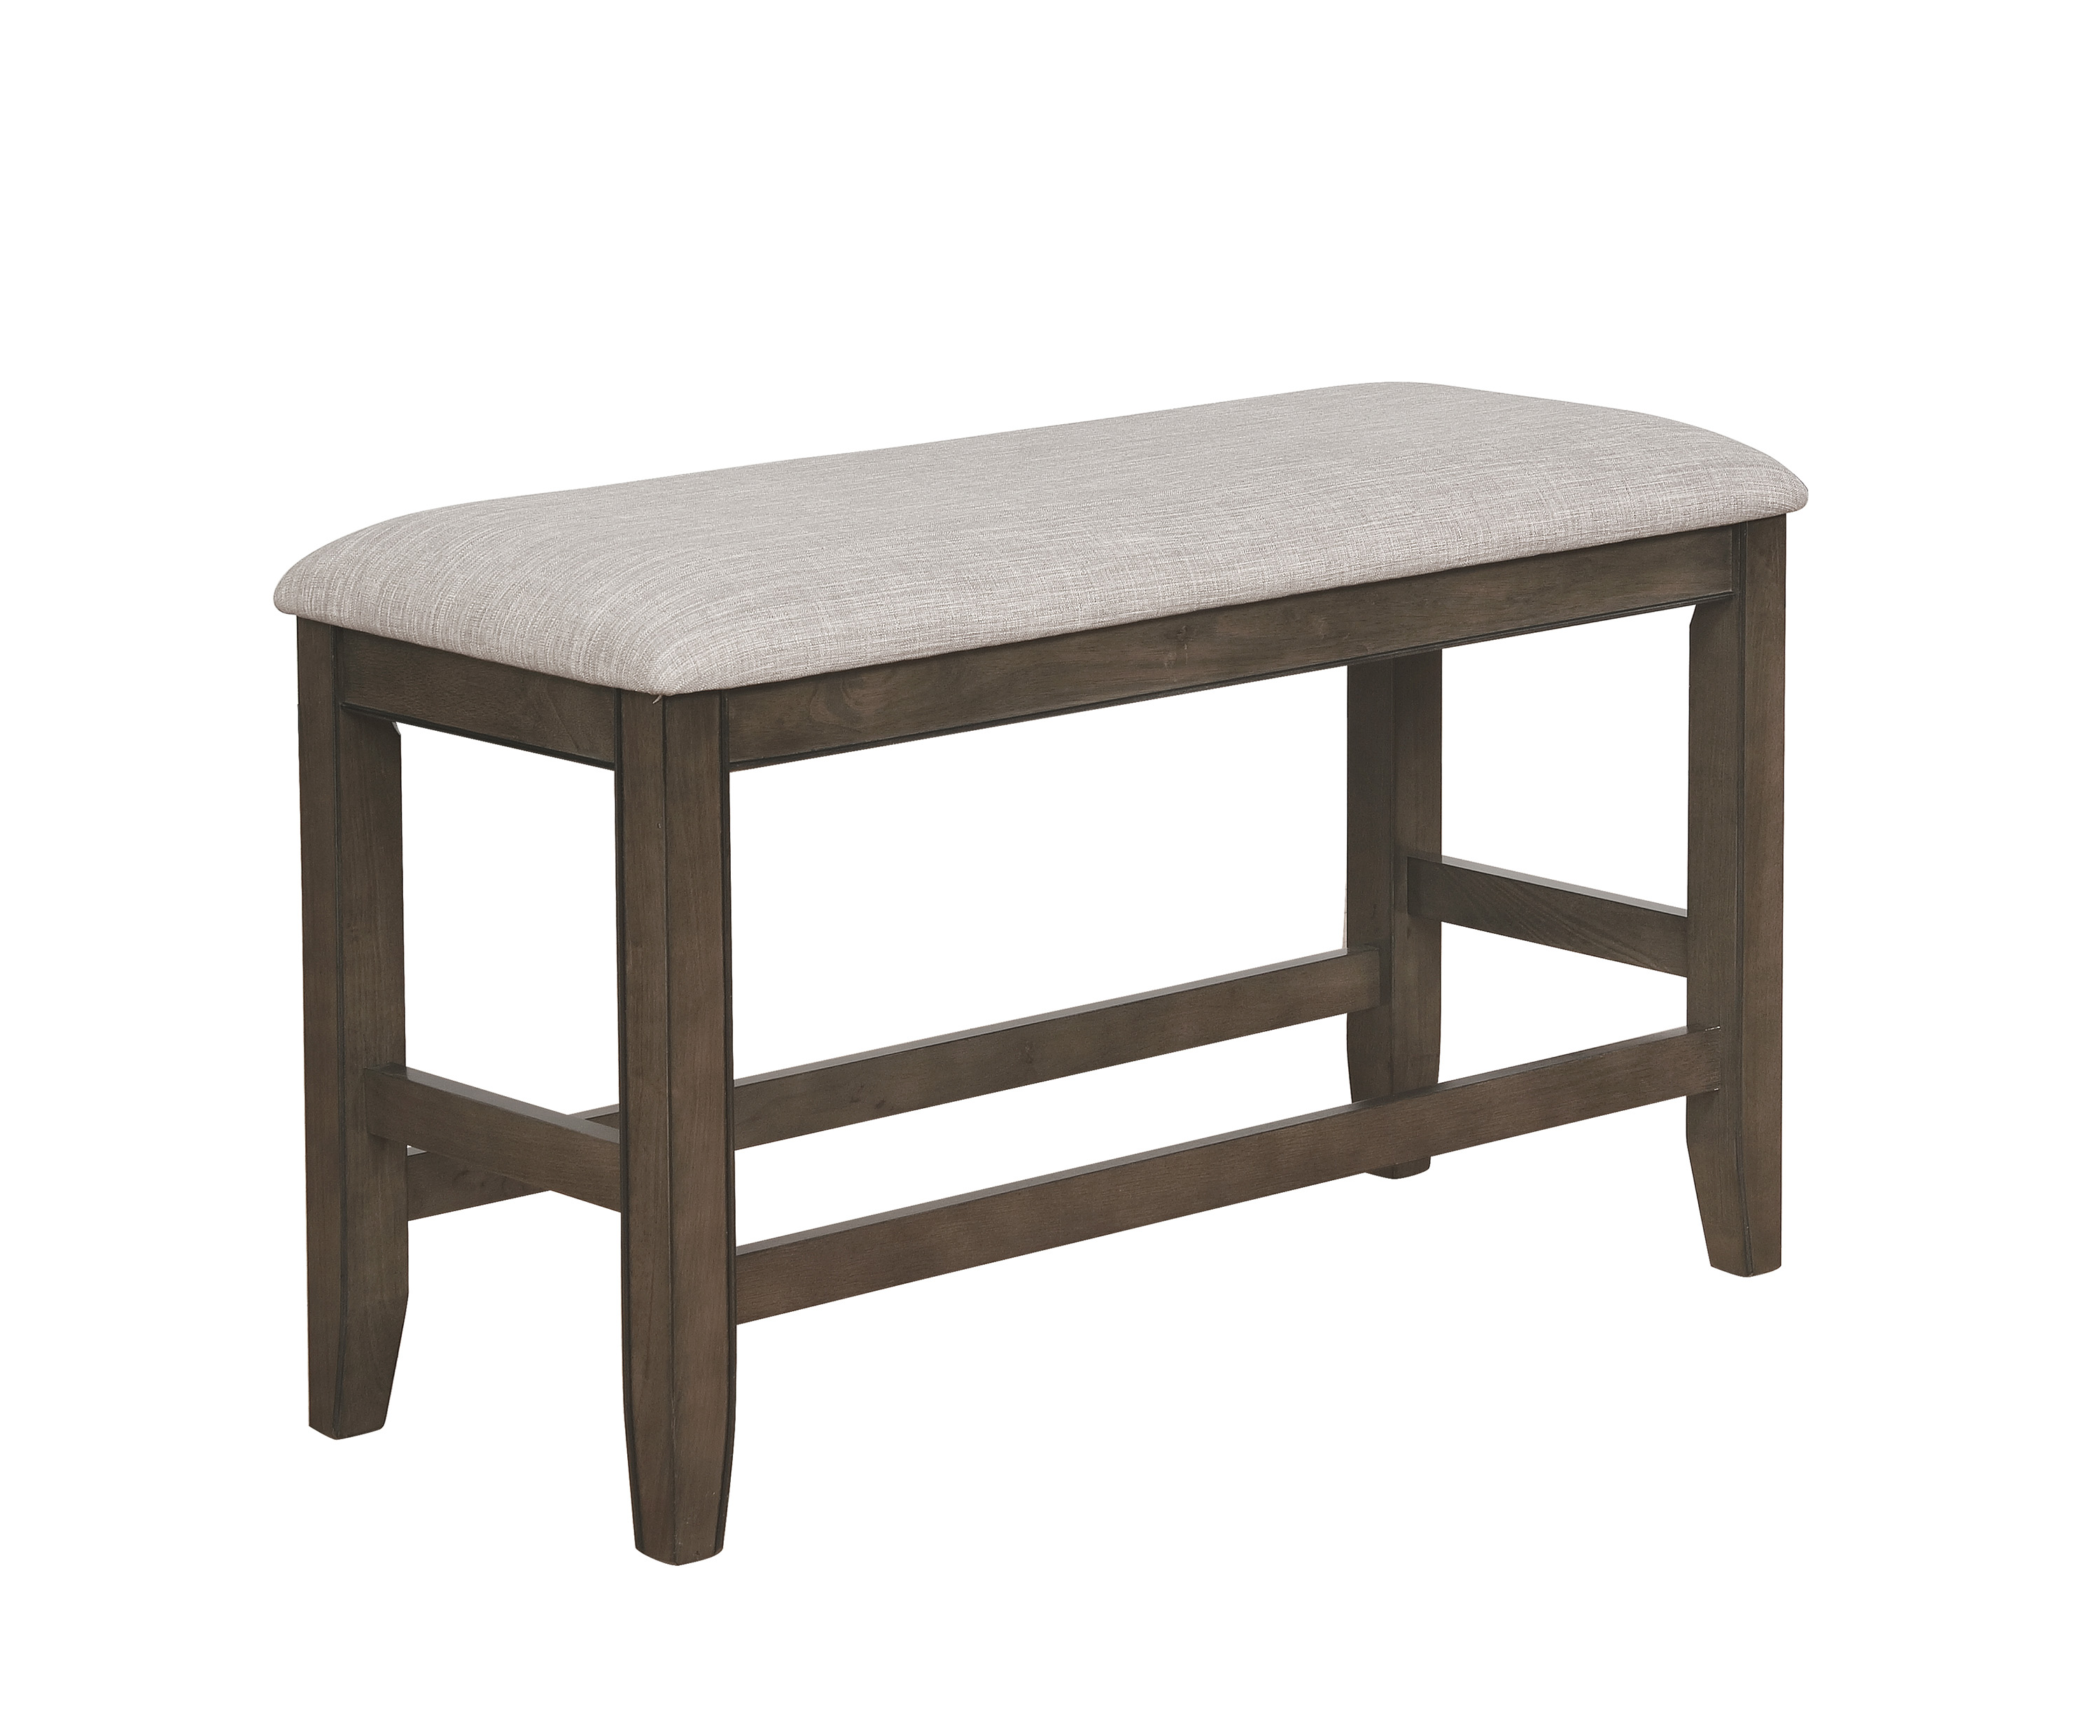 FULTON COUNTER HEIGHT BENCH GREY